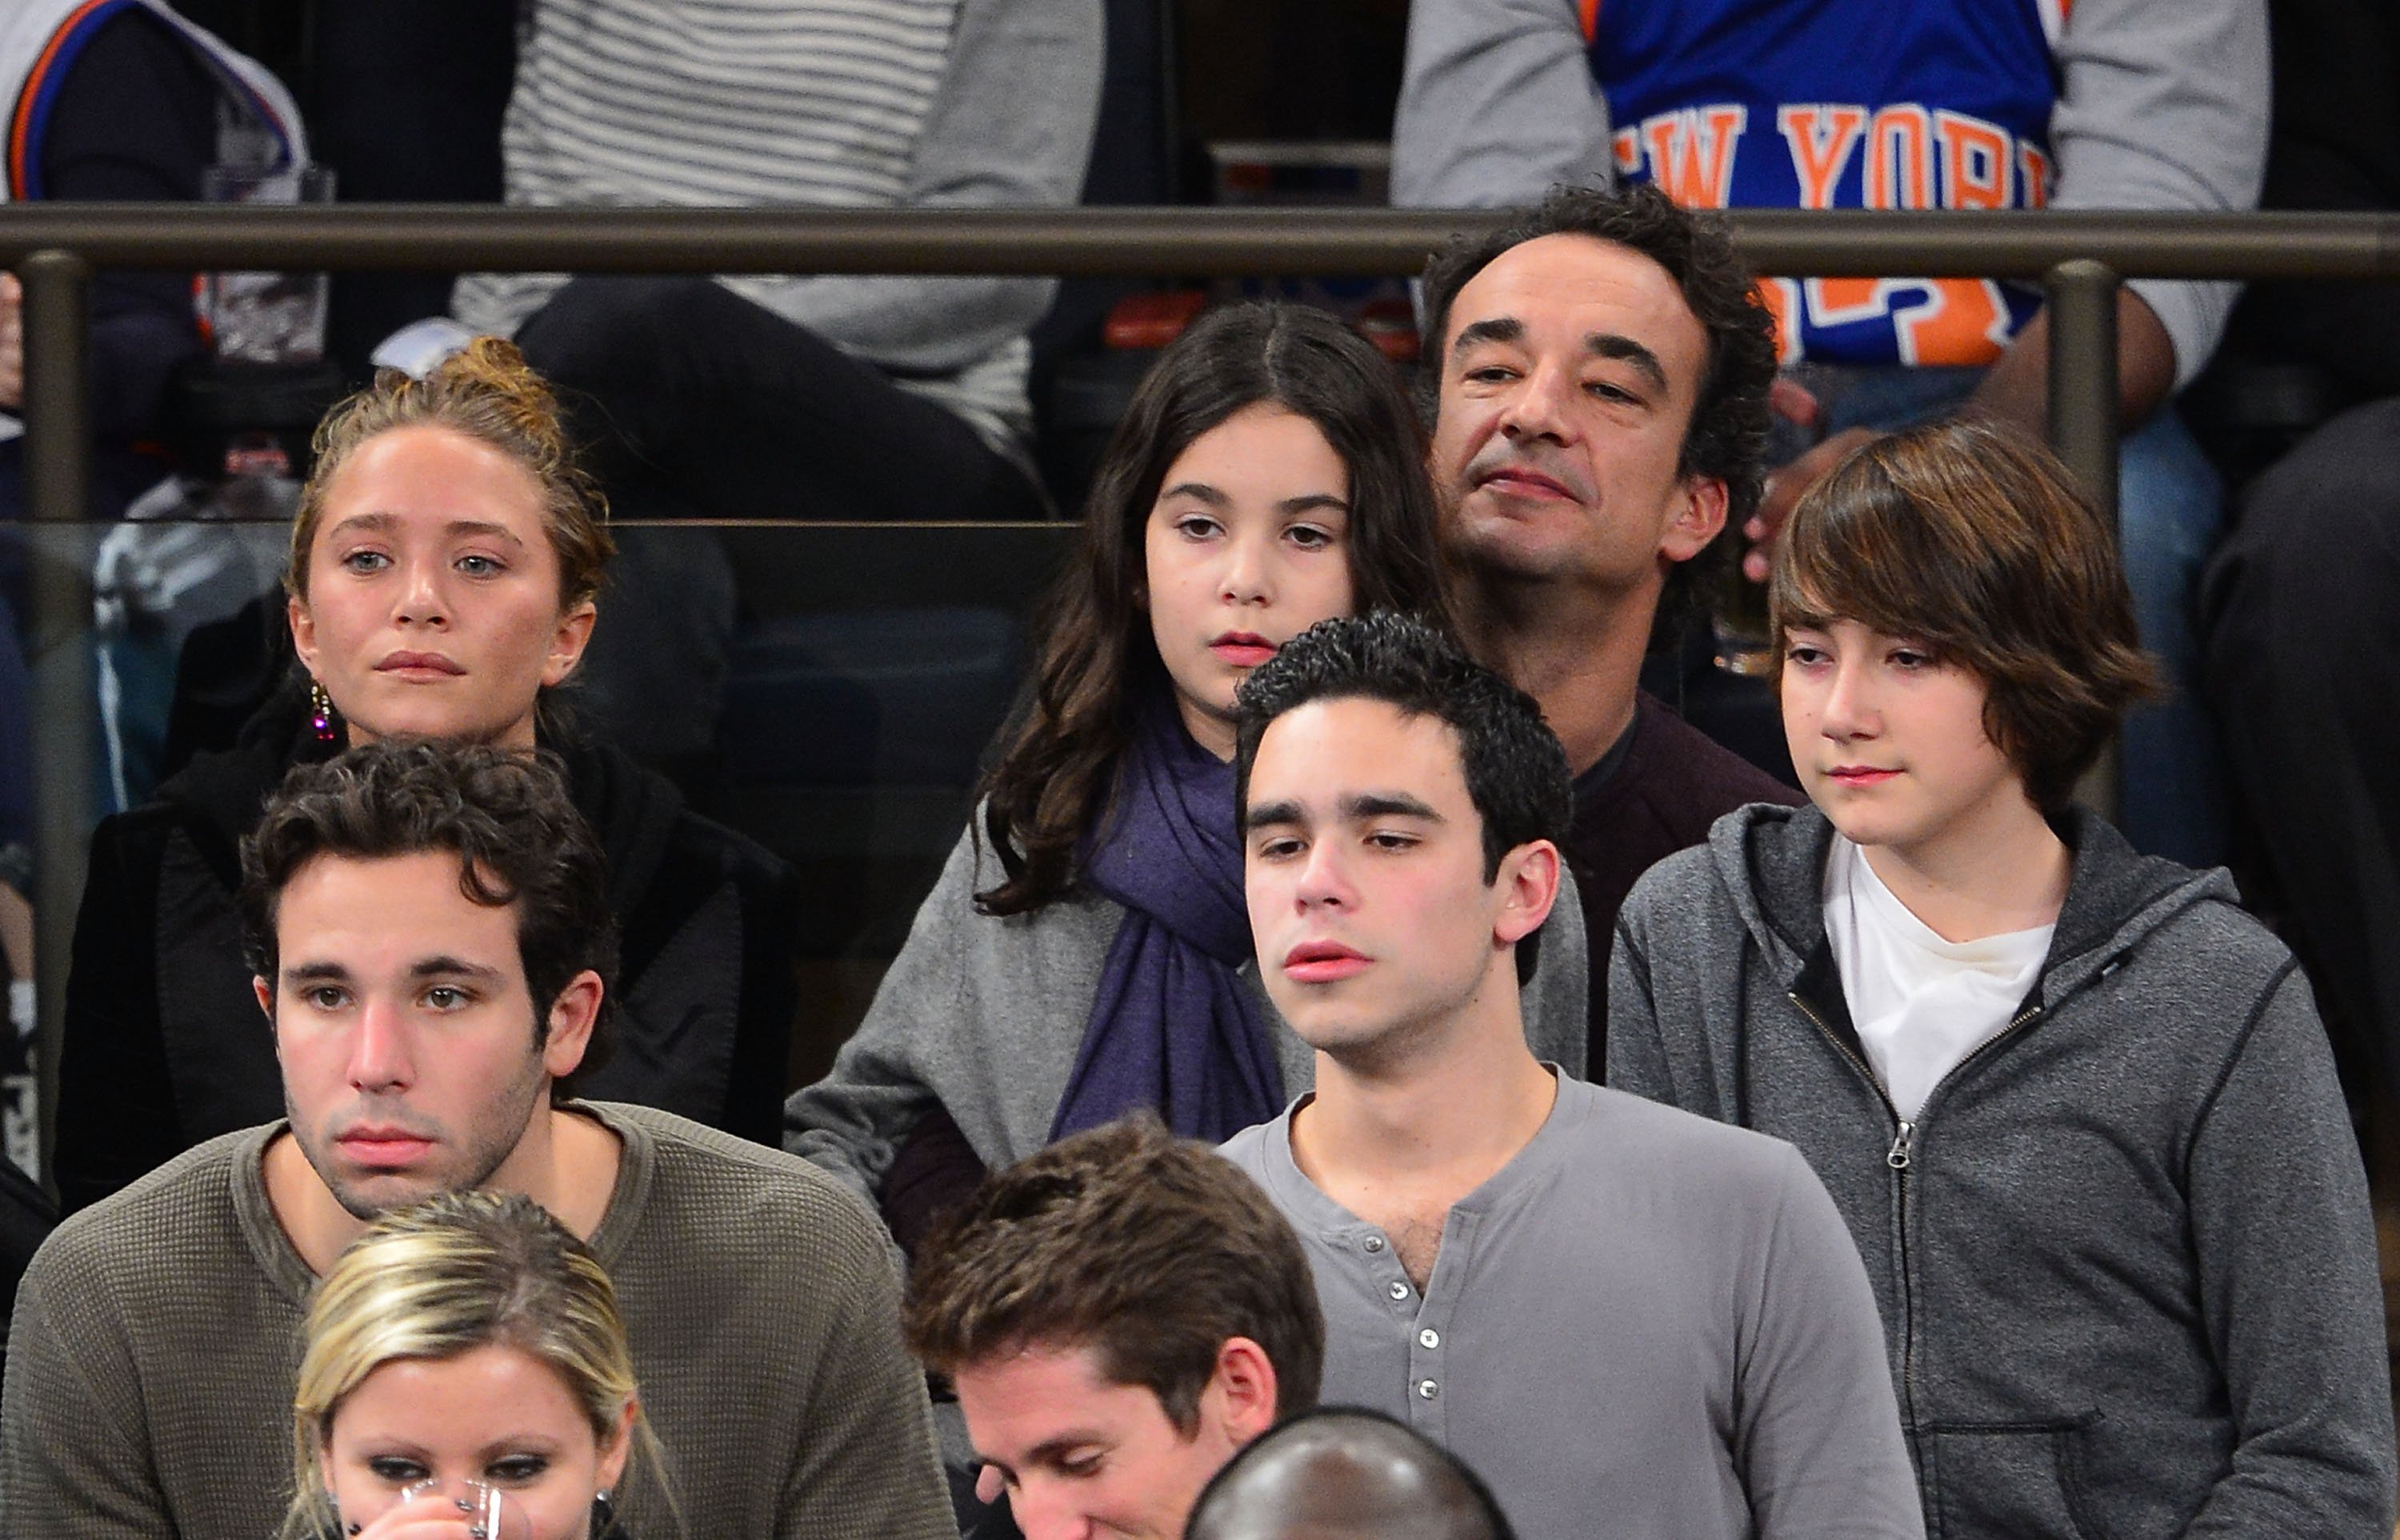 Mary-Kate Olsen pictured with Olivier Sarkozy and his children during the Dallas Mavericks vs New York Knicks game at Madison Square Garden on November 9, 2012 in New York City. / Source: Getty Images